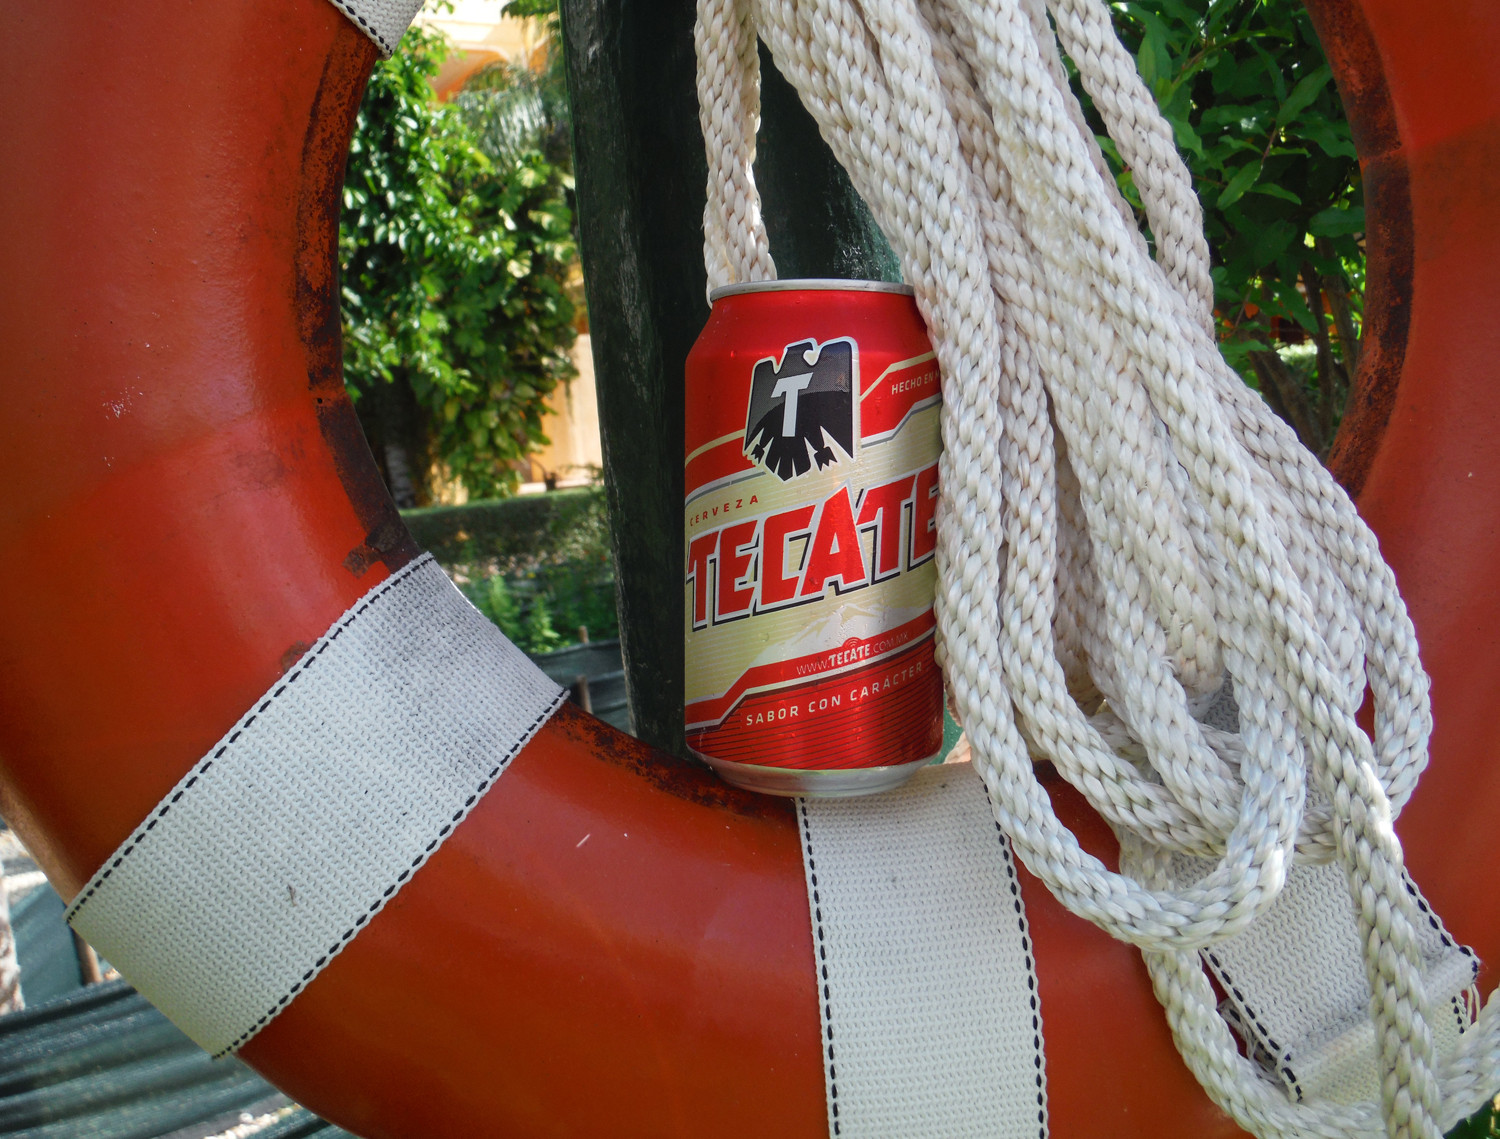 Tecate beach beer is a smooth drinking Mexican lager.